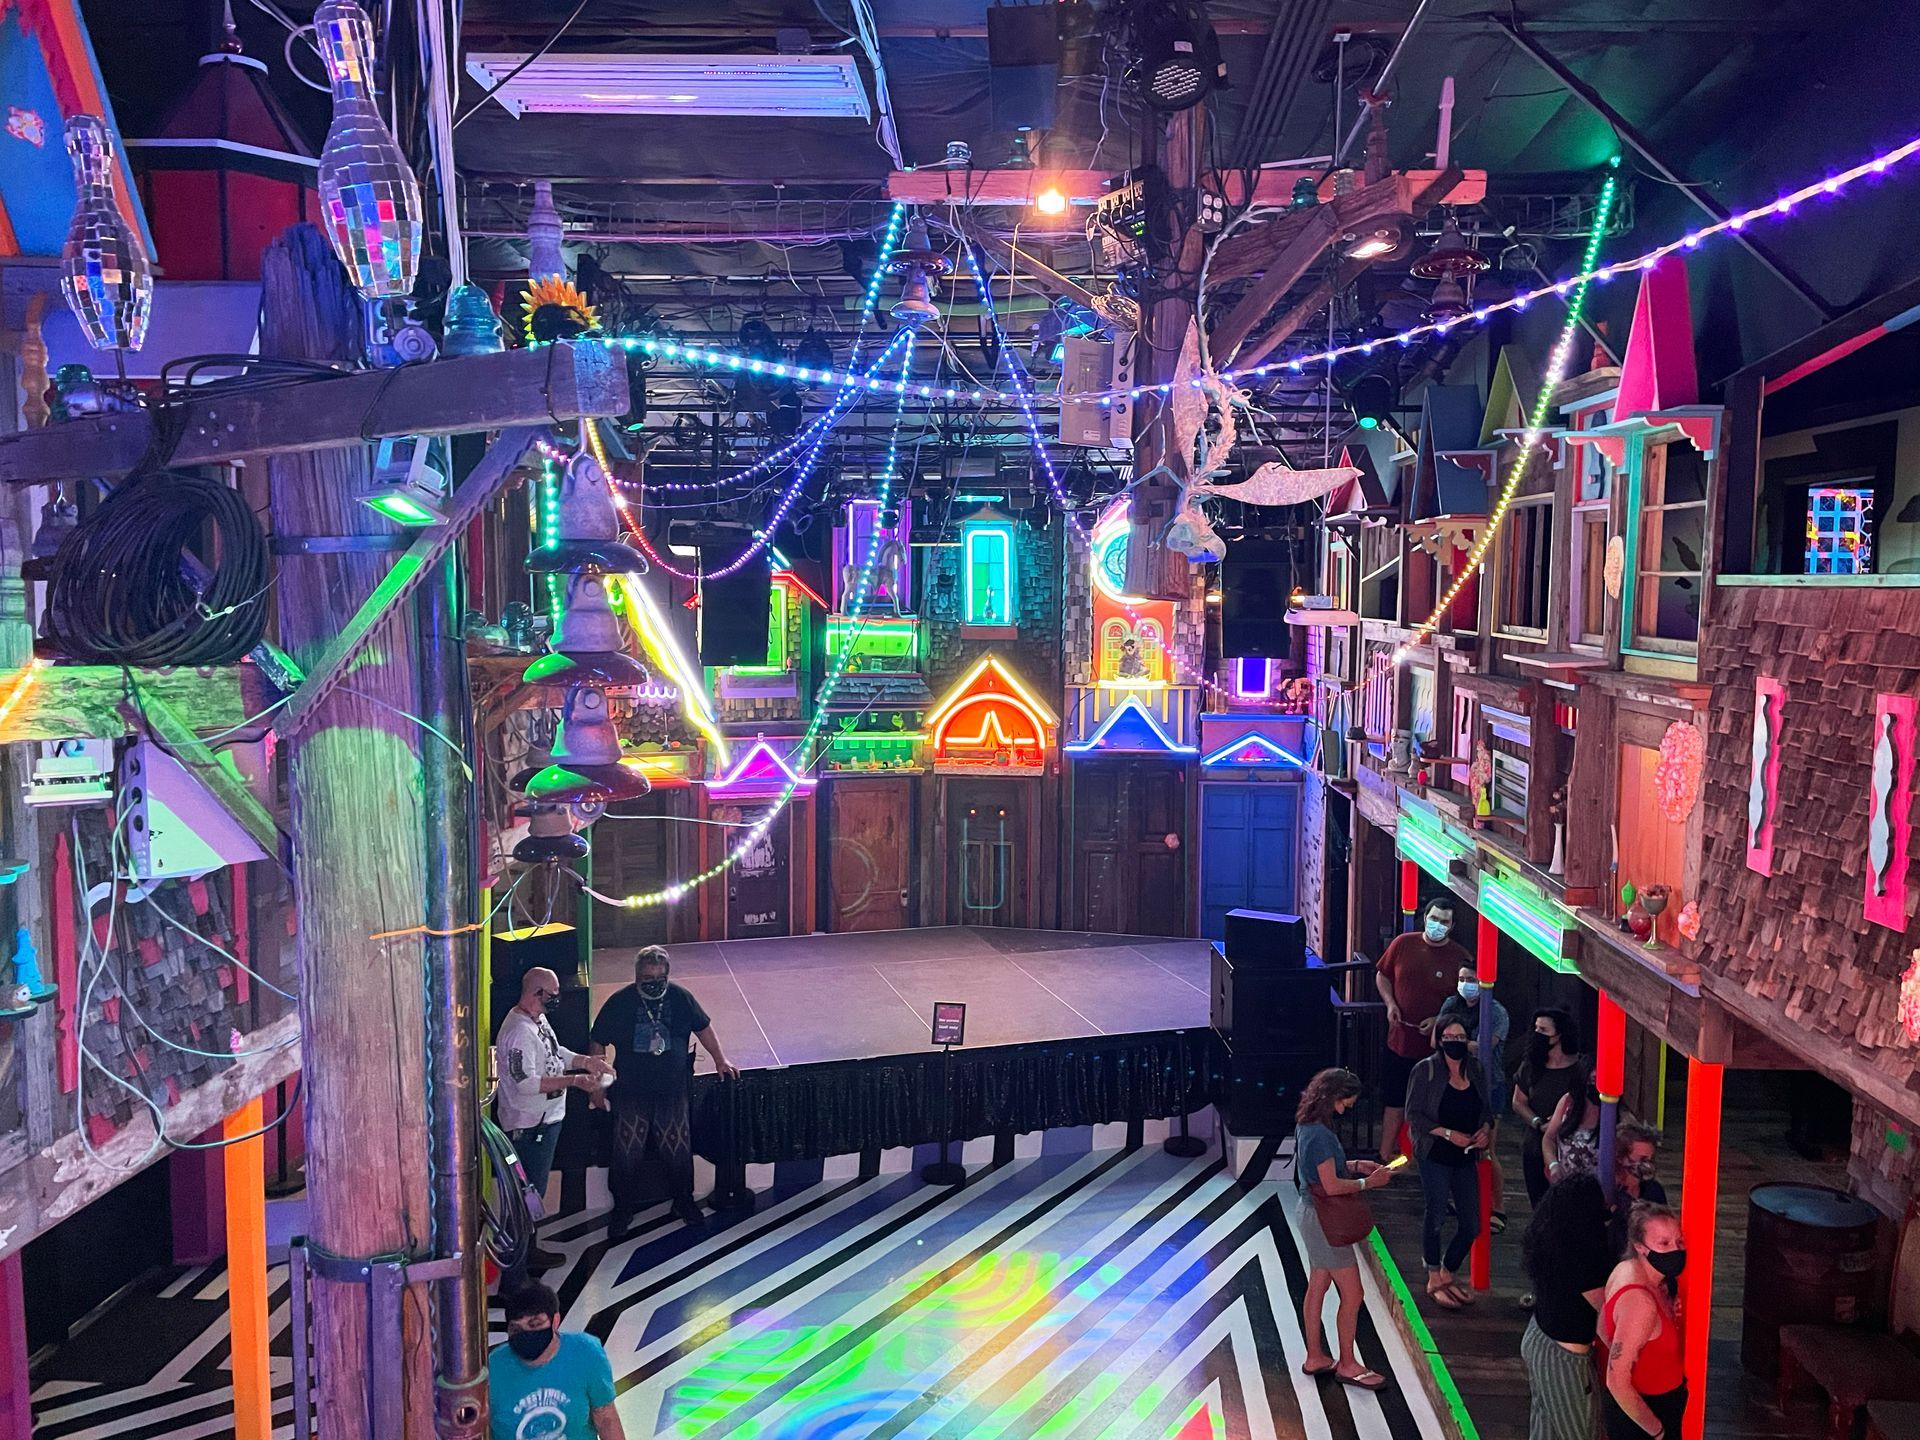 A room in Meow Wolf that is two stories tall and resembles a city. There are storefronts, bold stripes on the floor and colorful lights all over the room.